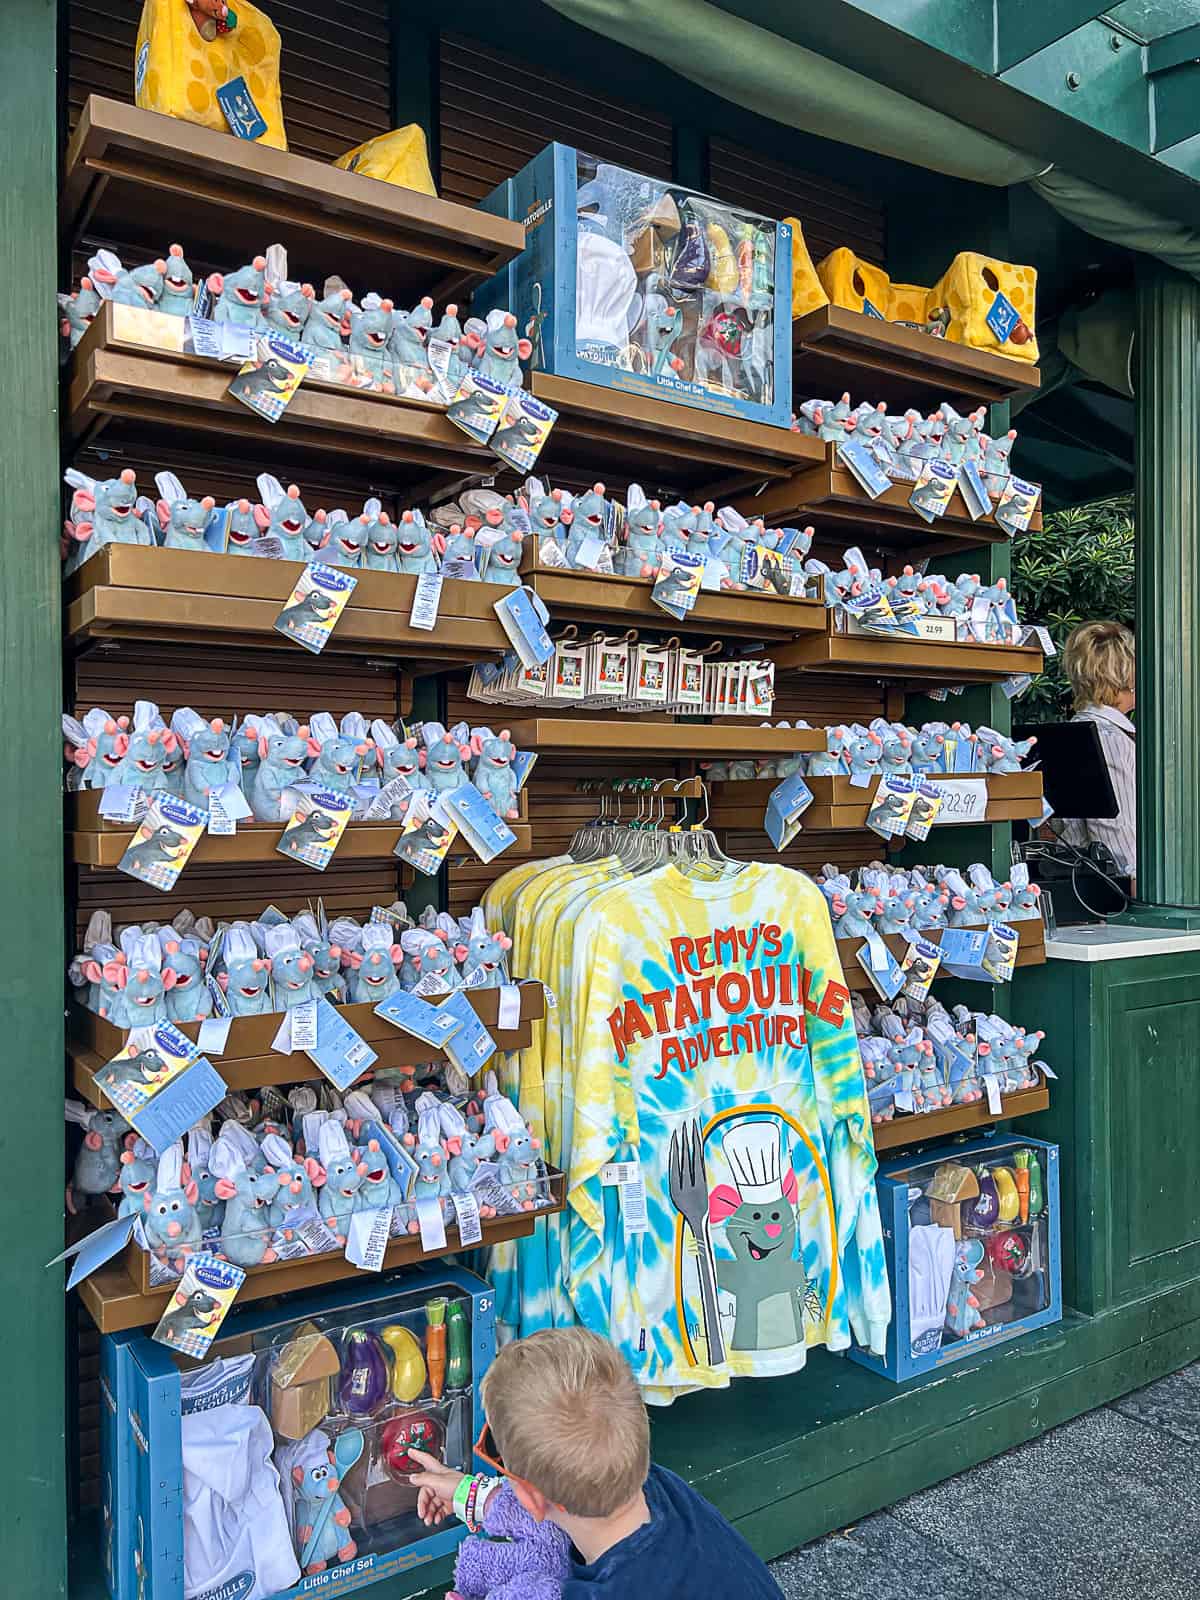 Kid at Remy's Ratatouille gift kiosk in Disney World Epcot Park